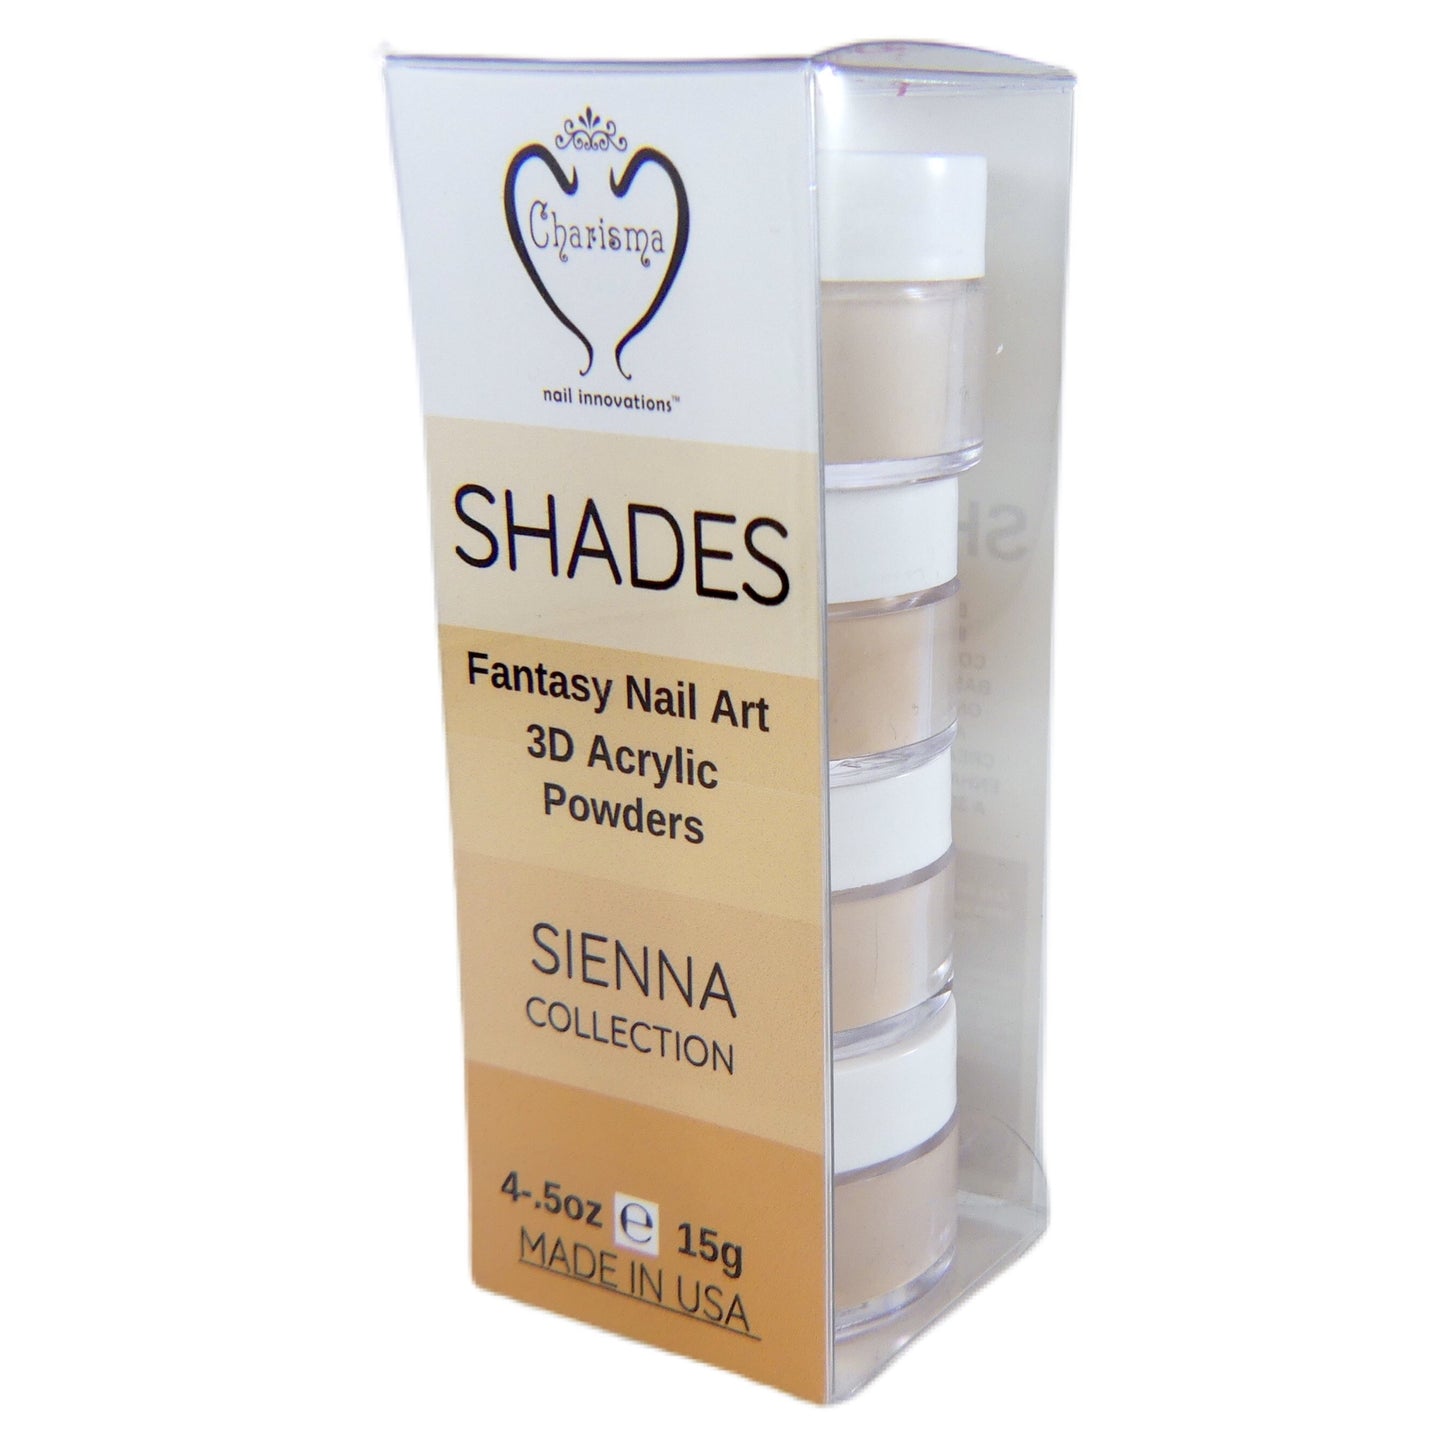 Load image into Gallery viewer, Charisma Nail 3D Acrylic Powder - Sienna 4pc - My Little Nail Art Shop
